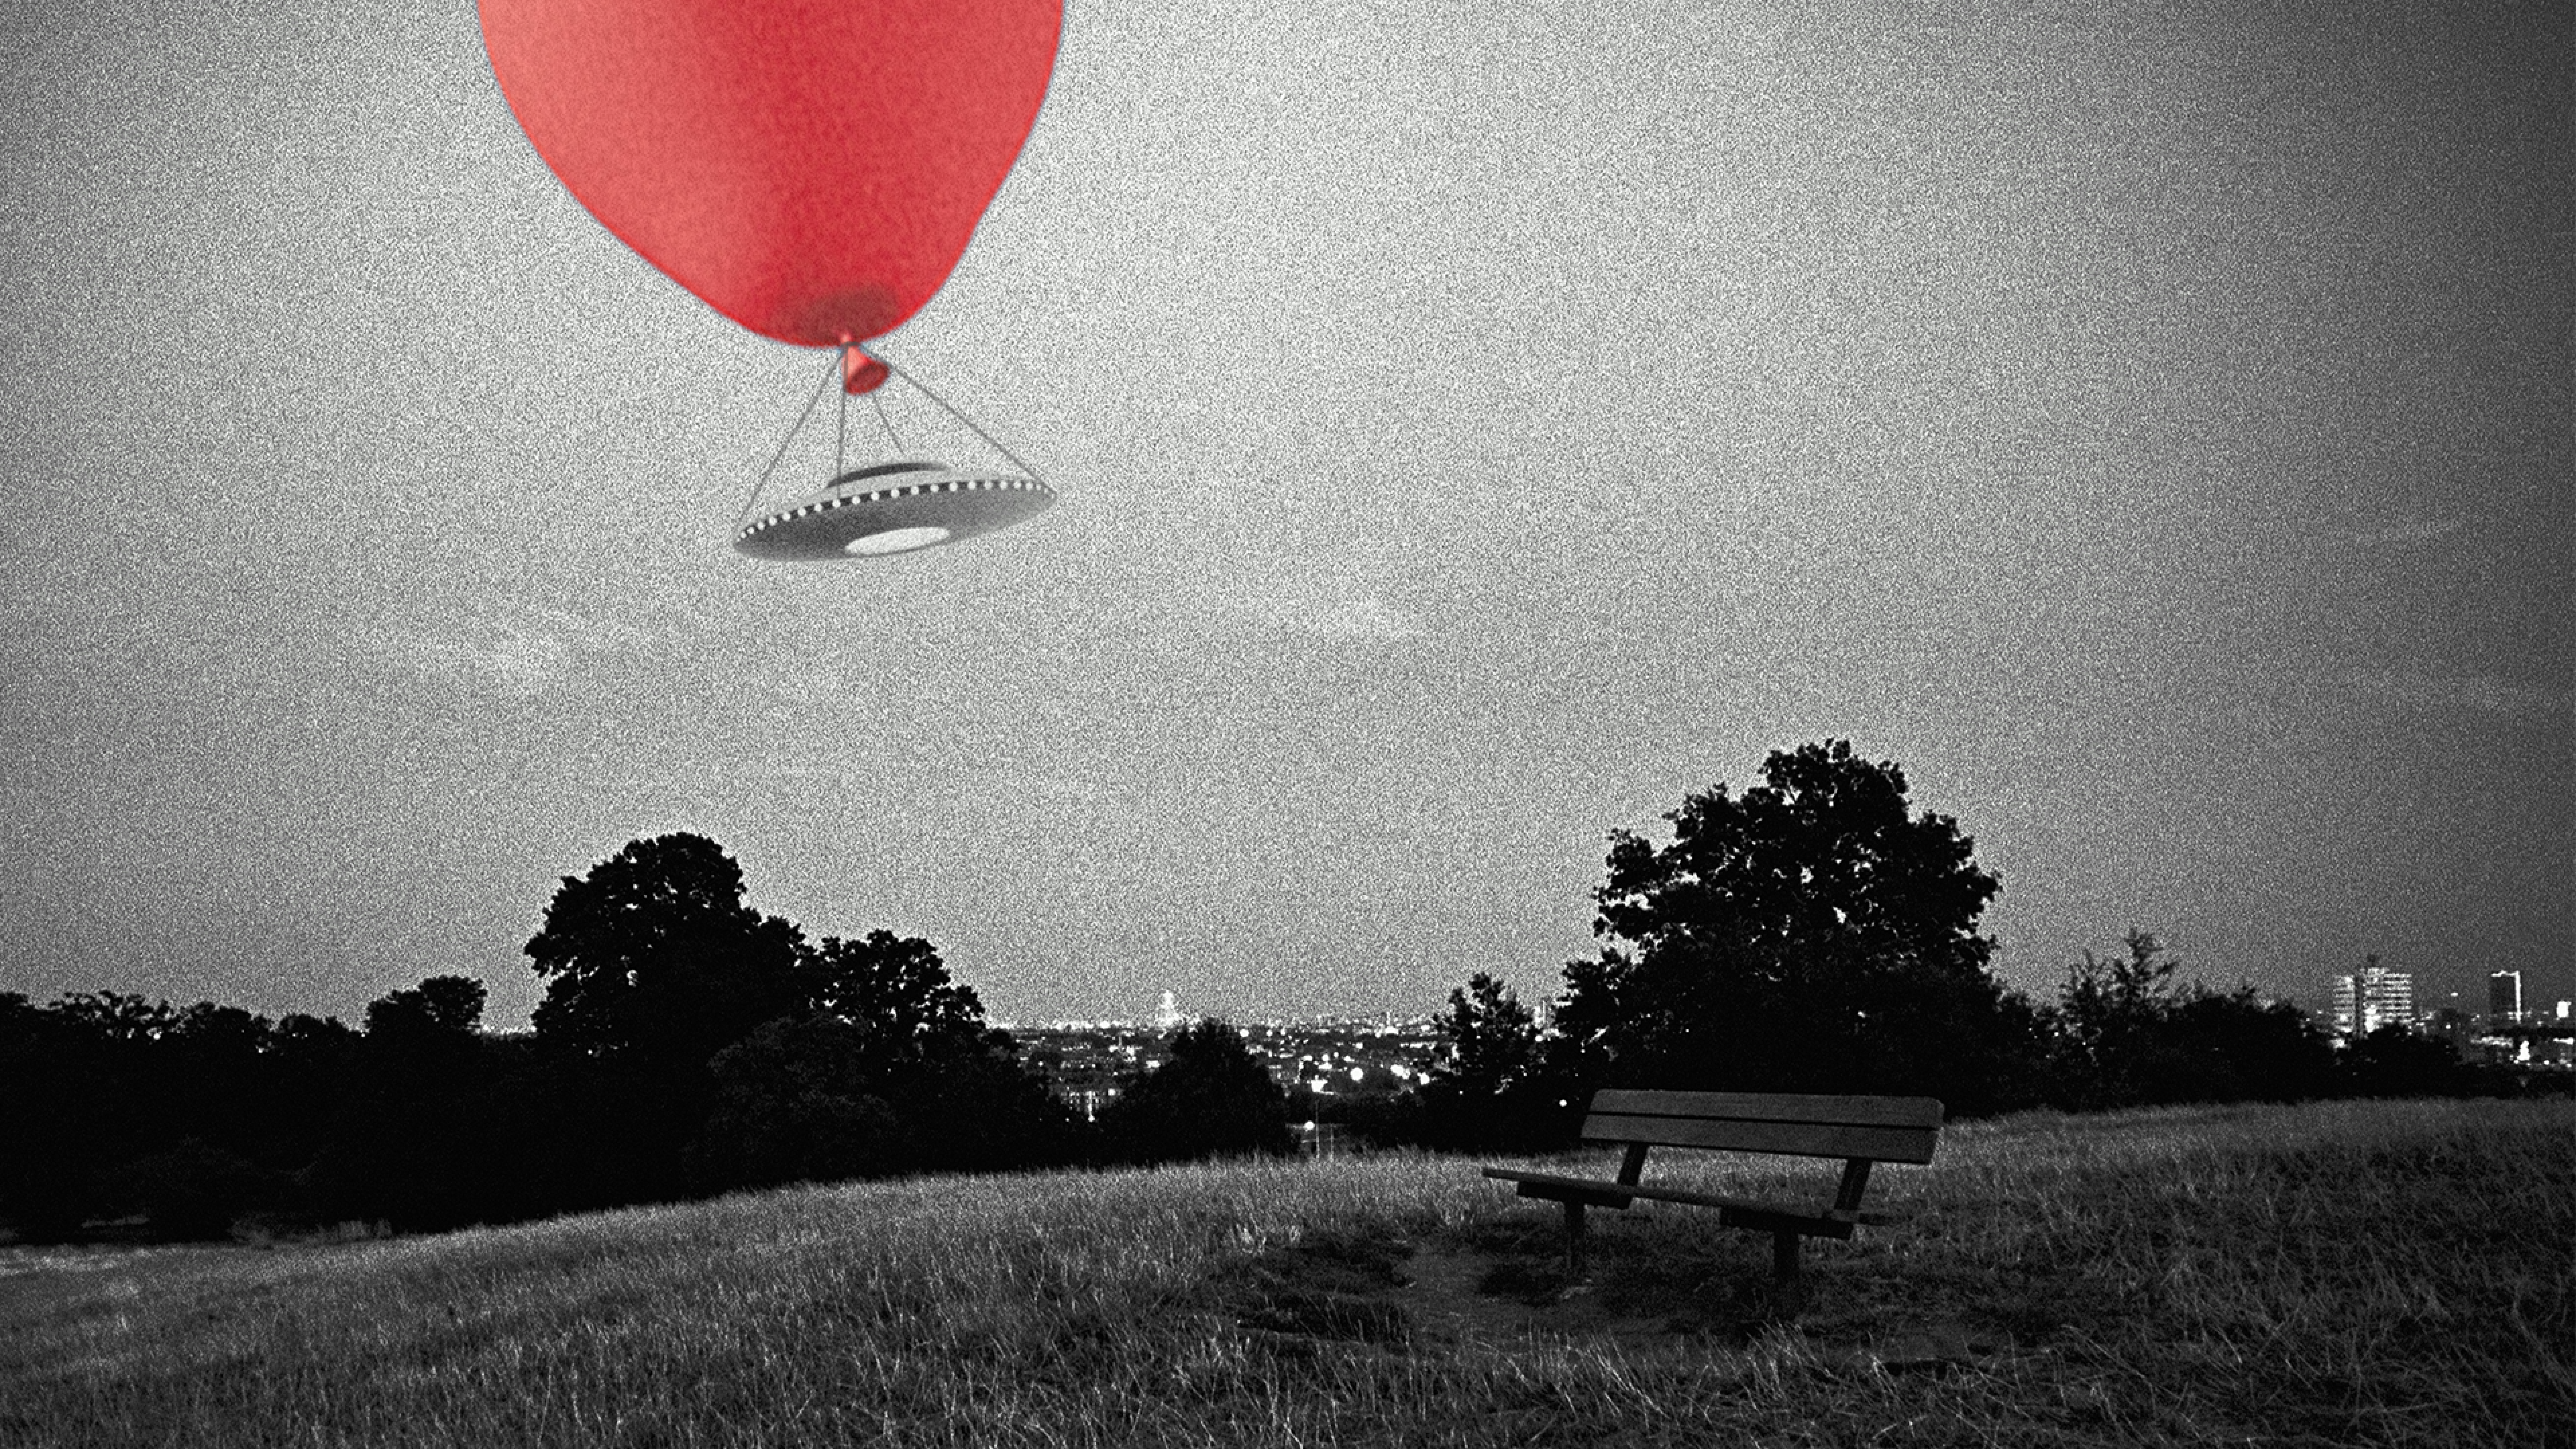 Sorry, UFO Hunters--You Might Just Be Looking at a Spy Balloon